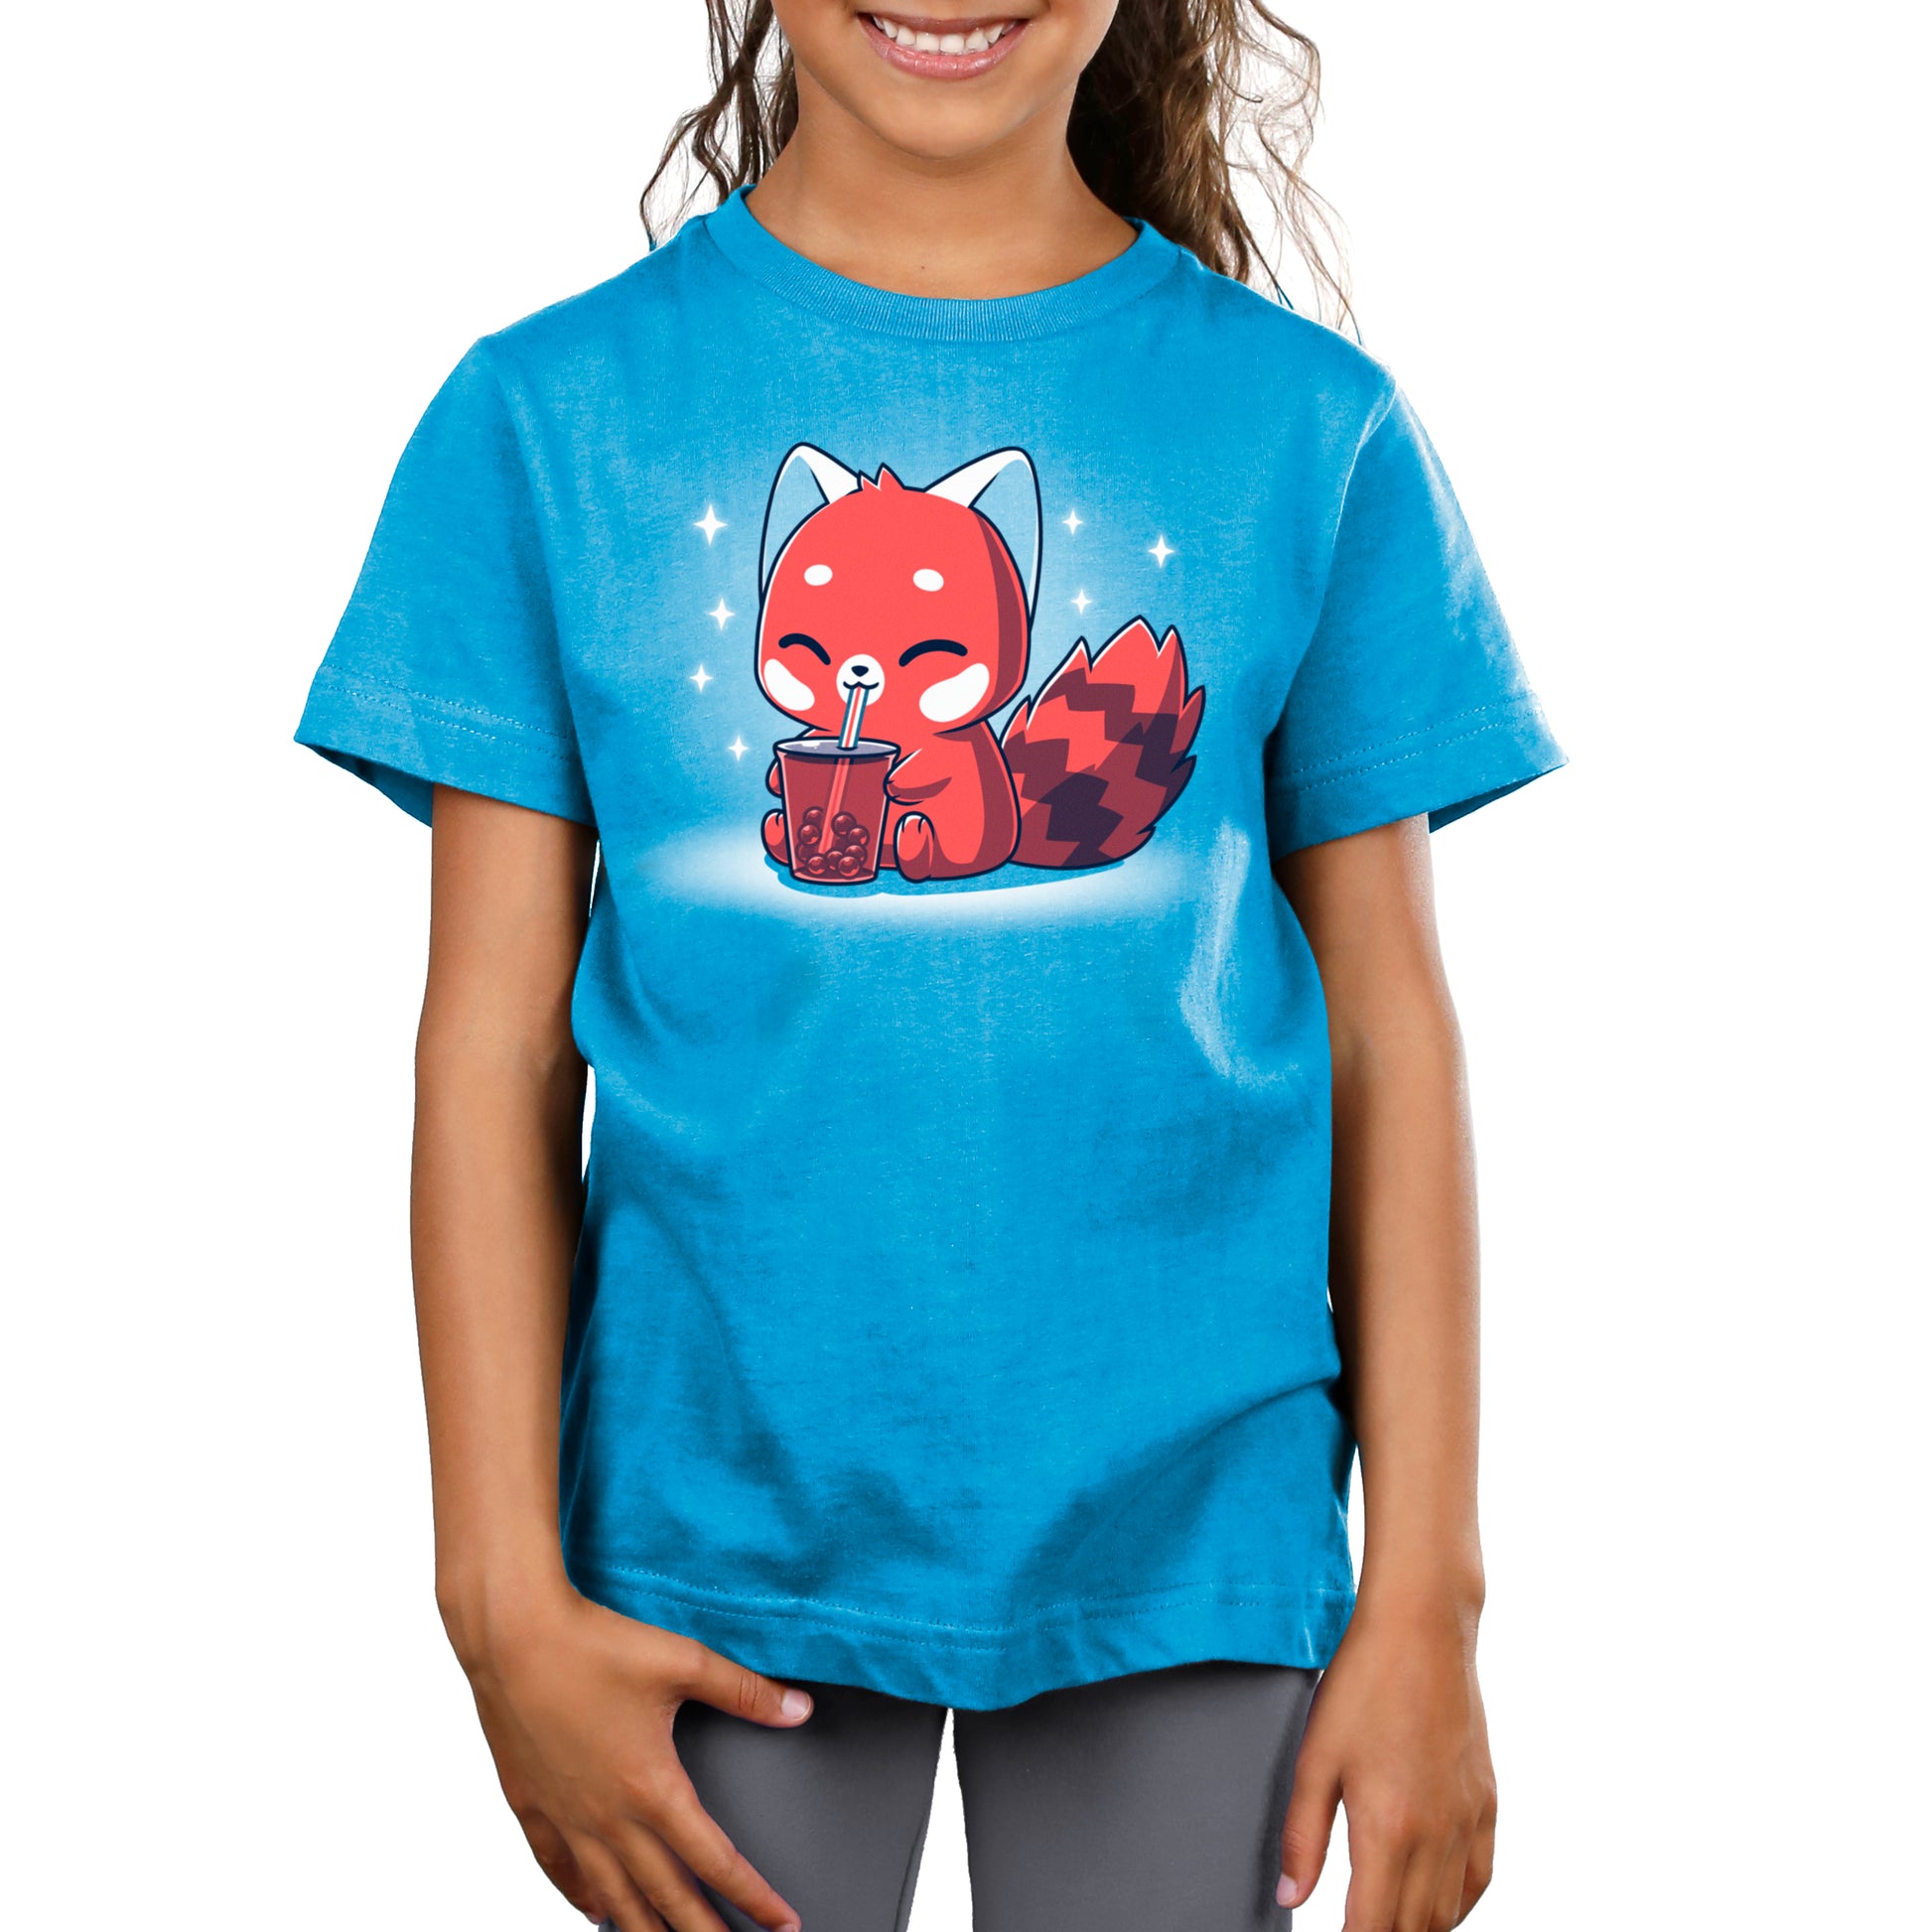 A girl wearing a TeeTurtle cobalt blue t-shirt with a Boba Red Panda on it.